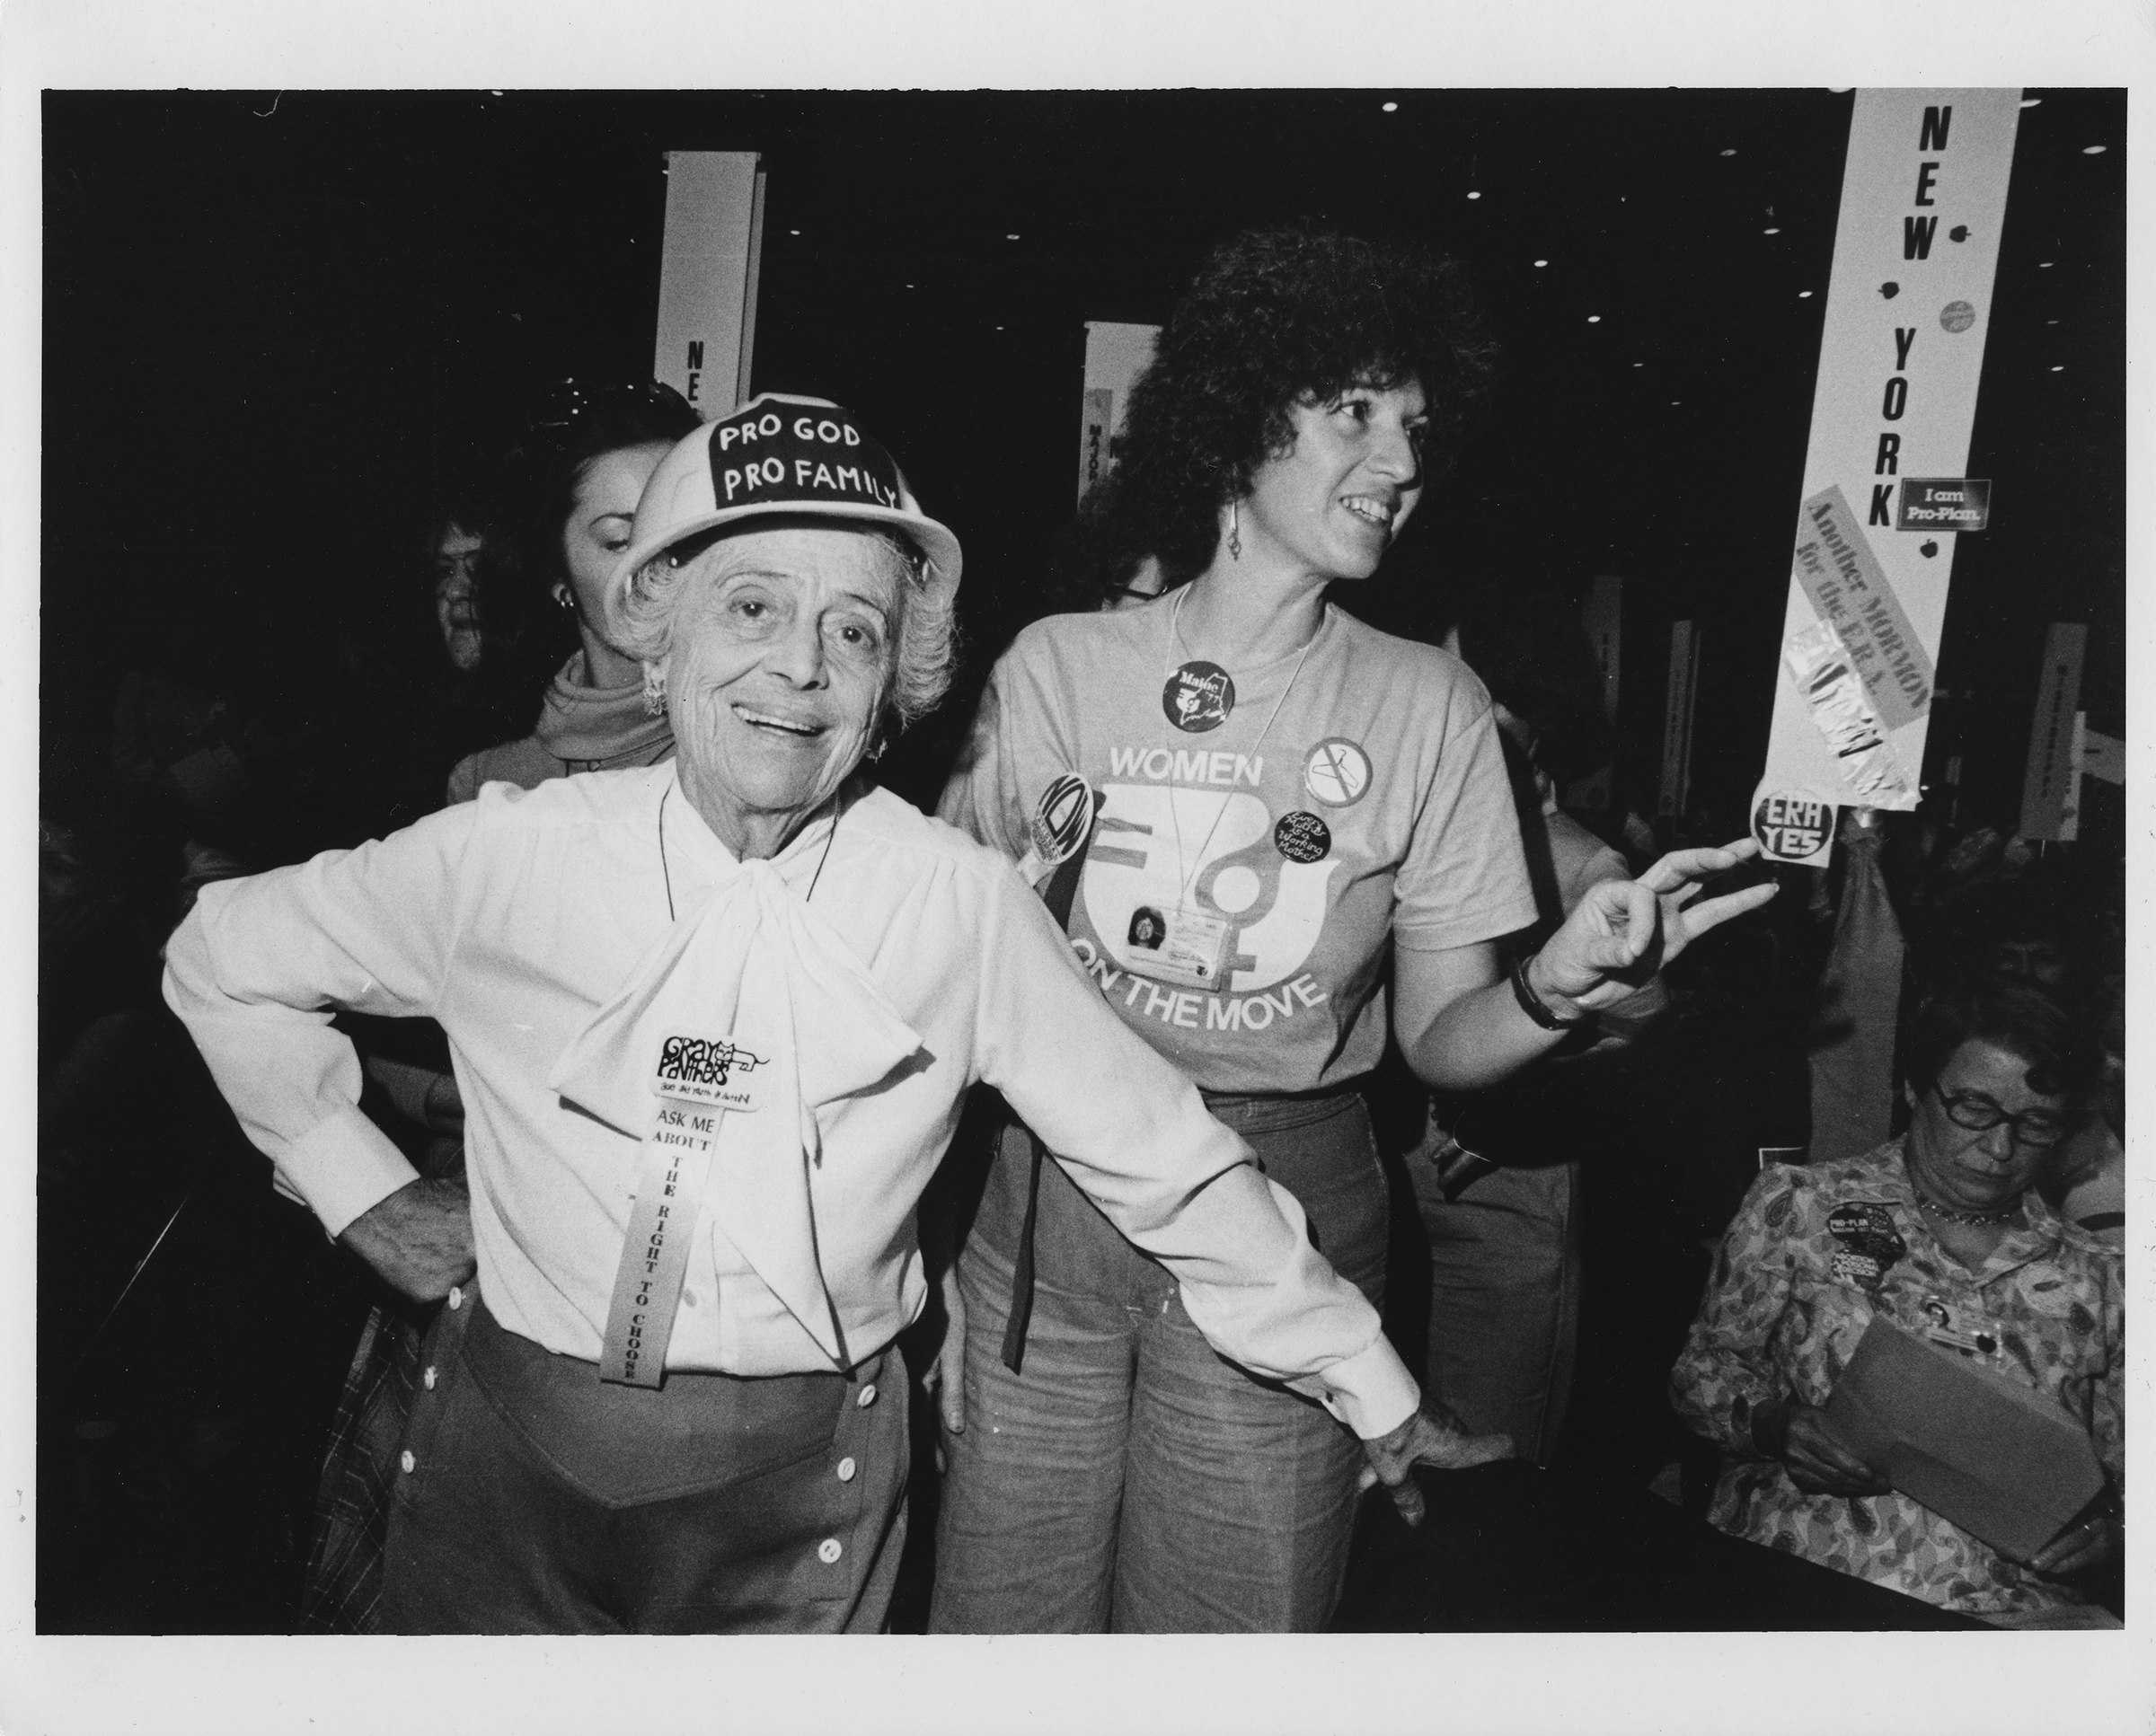 An older woman wearing a hardhat with the words "PRO GOD PRO FAMILY," a Gray Panthers pin, and a ribbon that reads "Ask me about the right to choose" smiles at the camera amid a conference crowd of women.